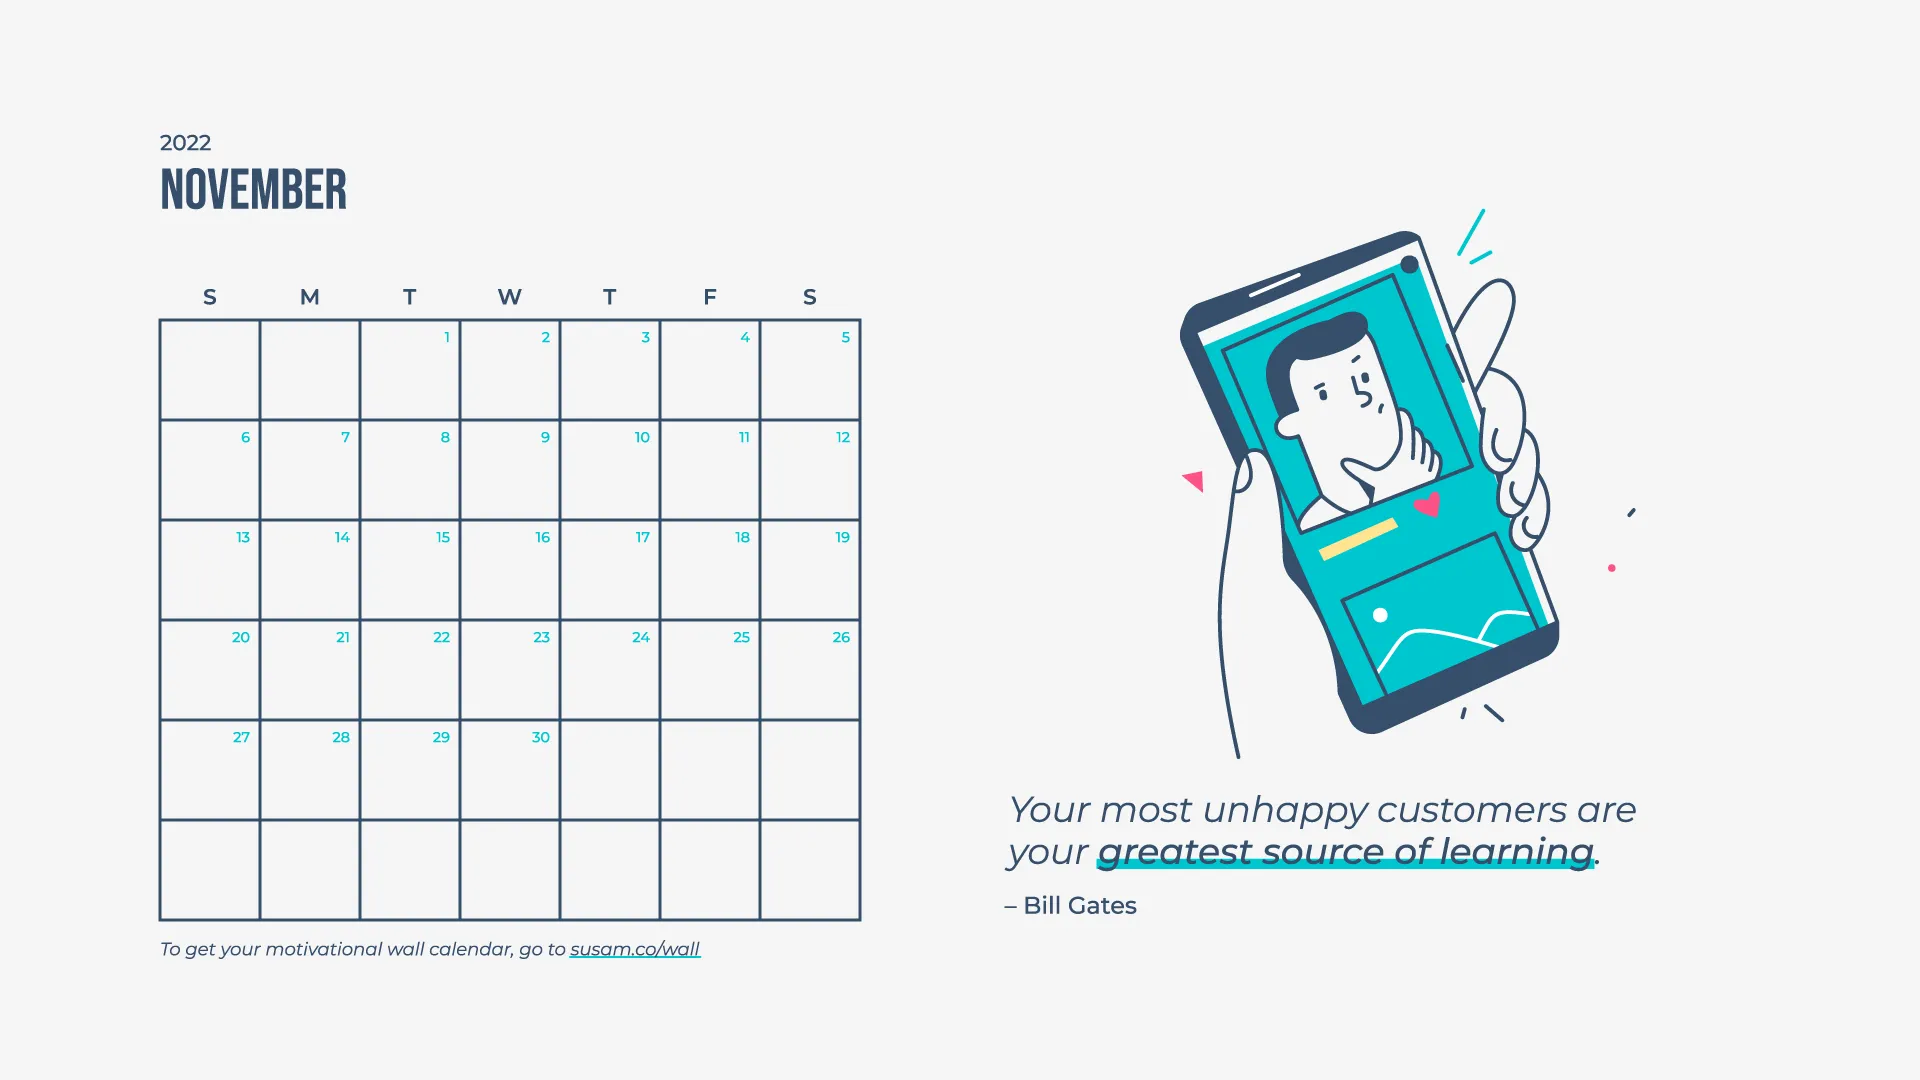 A calendar with an image of a person holding a phone.